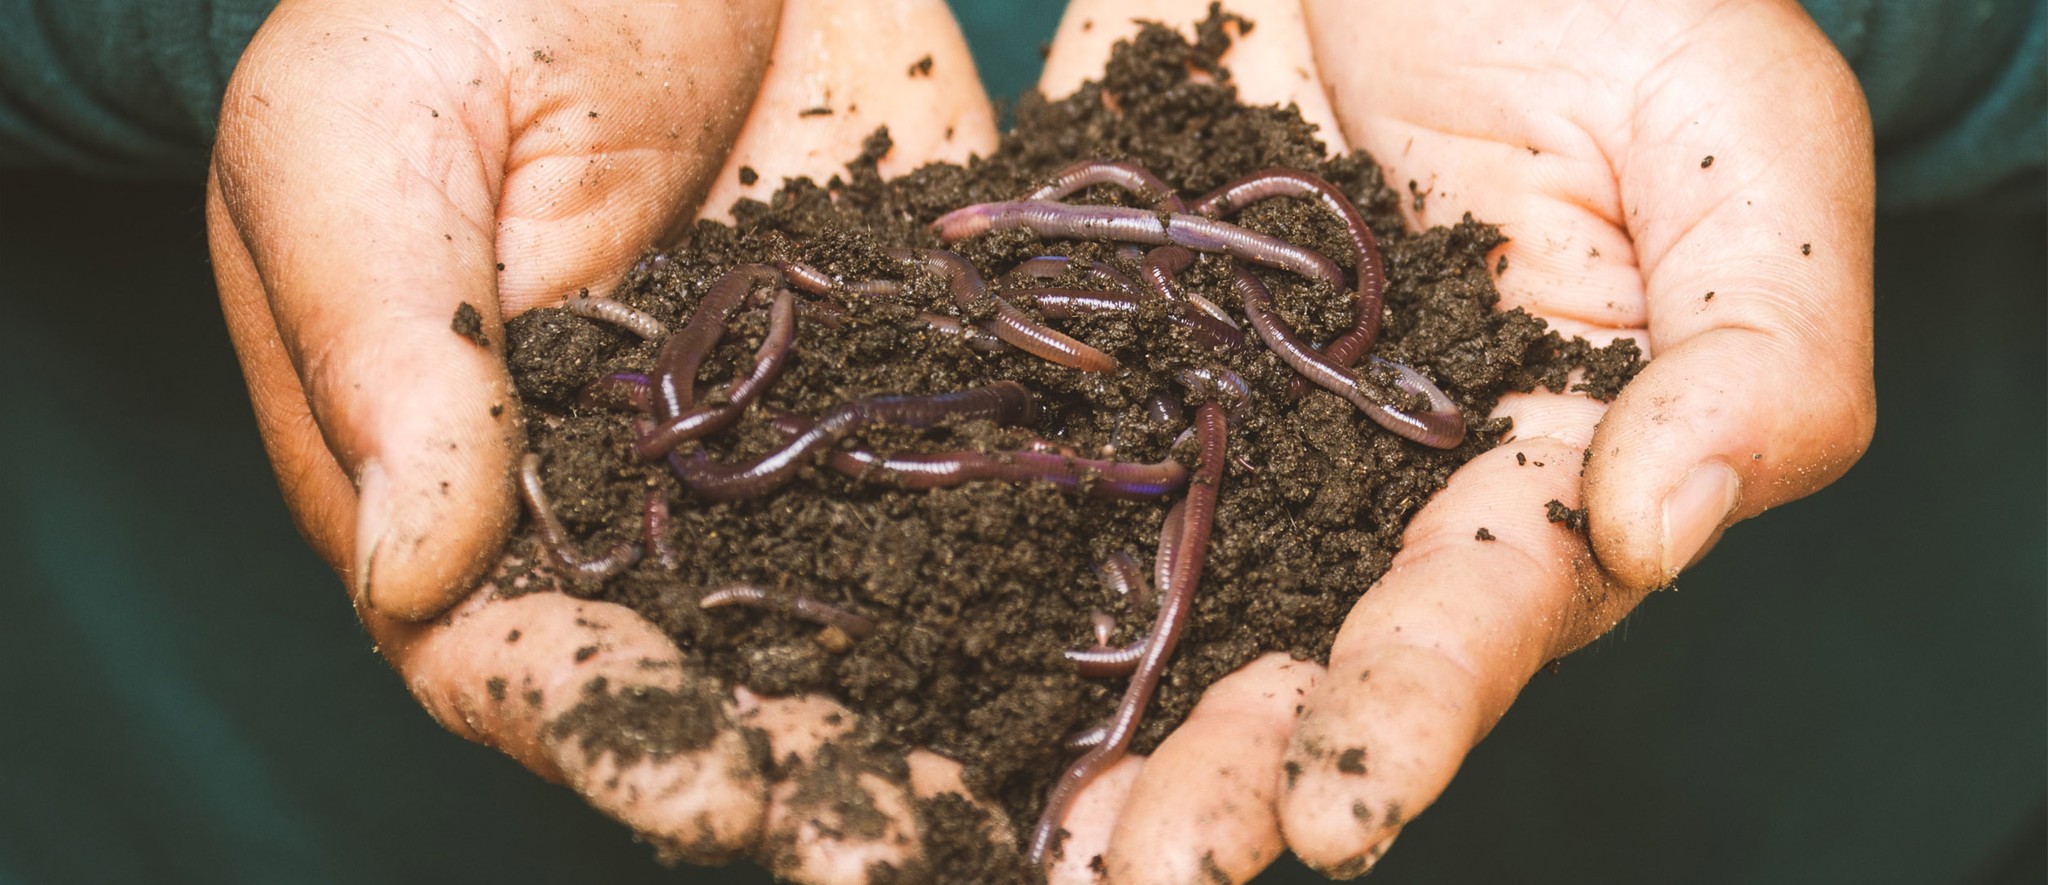 Earthworms close up